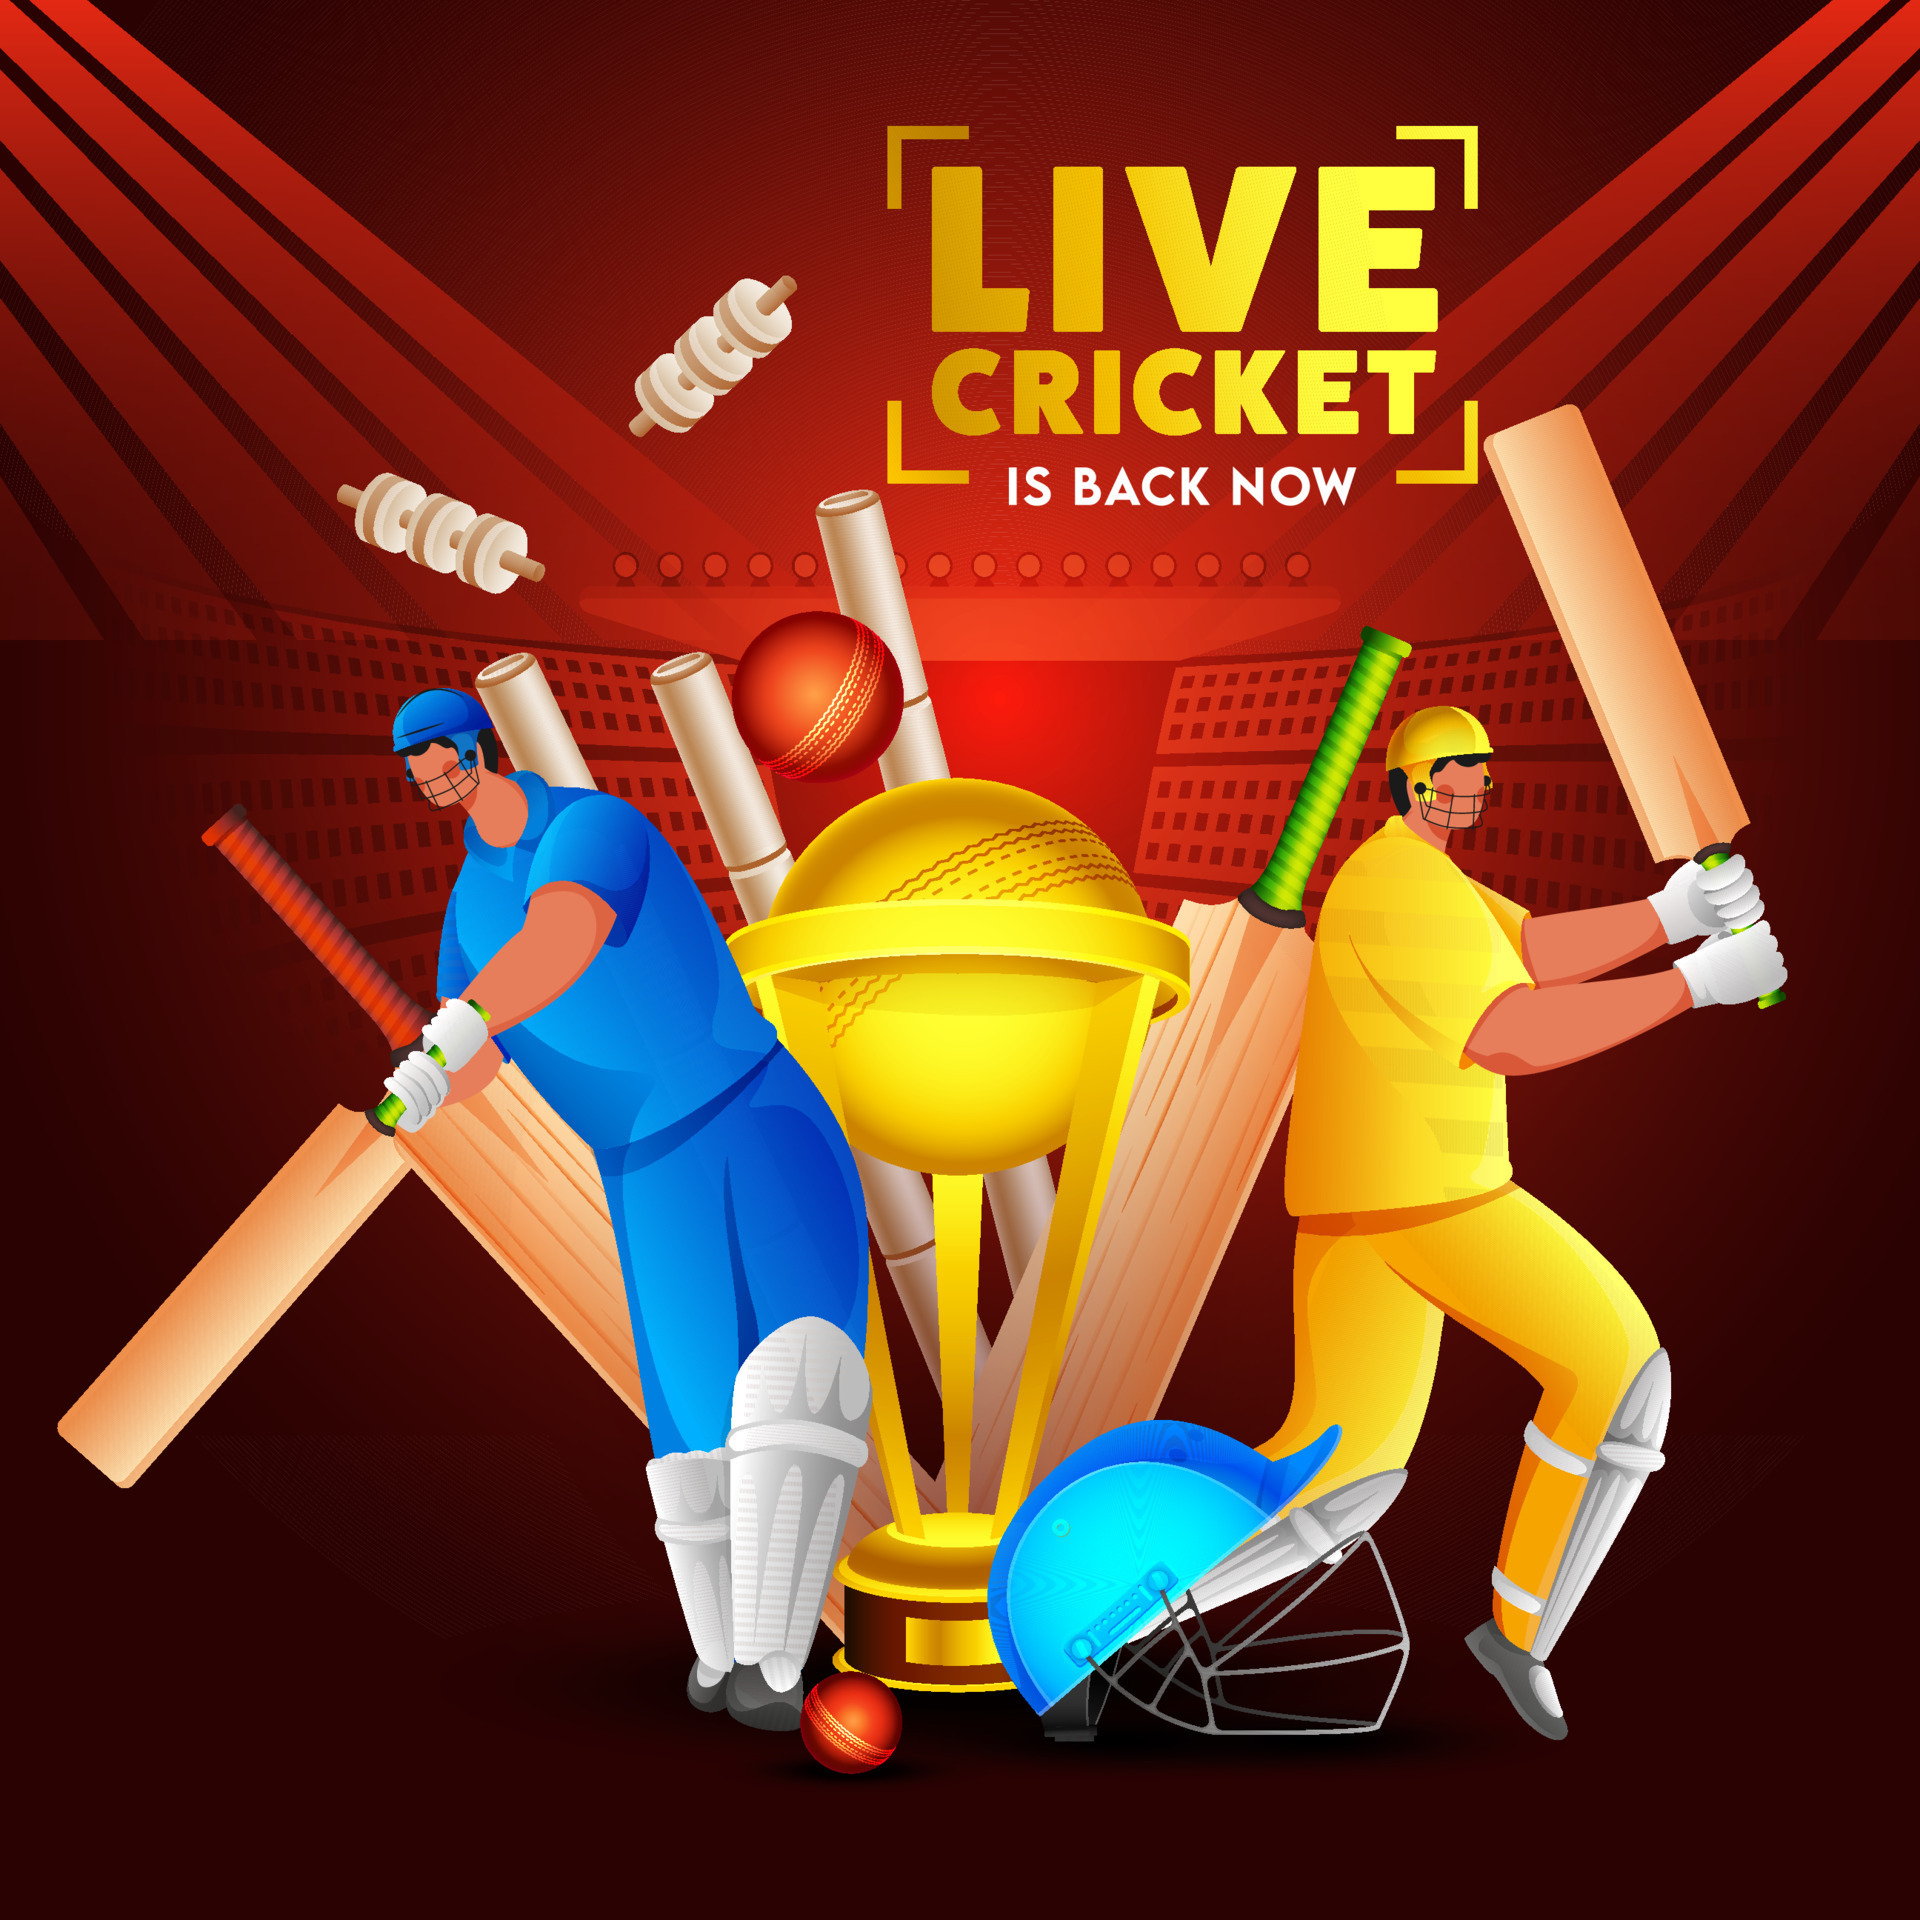 Two Batsman Player in Different Attire with Realistic Cricket Equipment and Golden Trophy Cup on Dark Red Stadium View Background